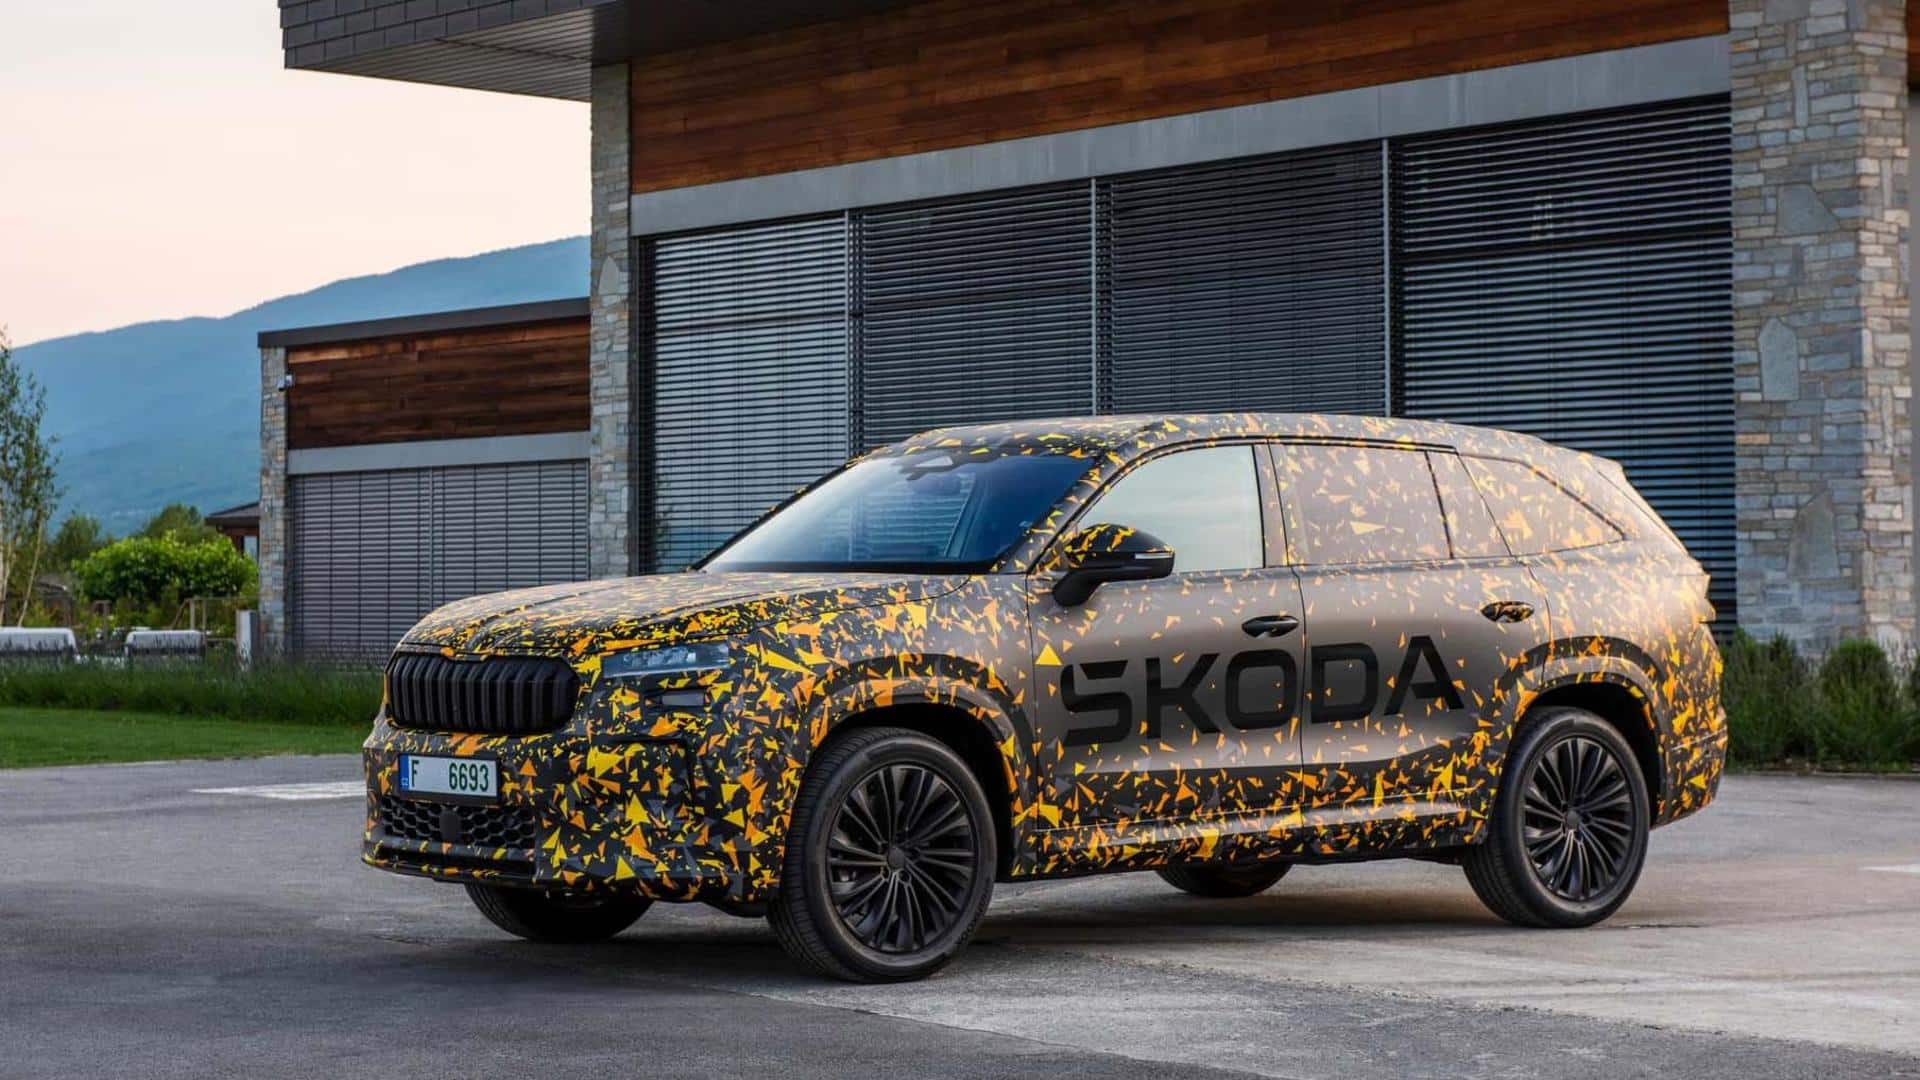 Skoda updates its Kodiaq SUV four years after launch